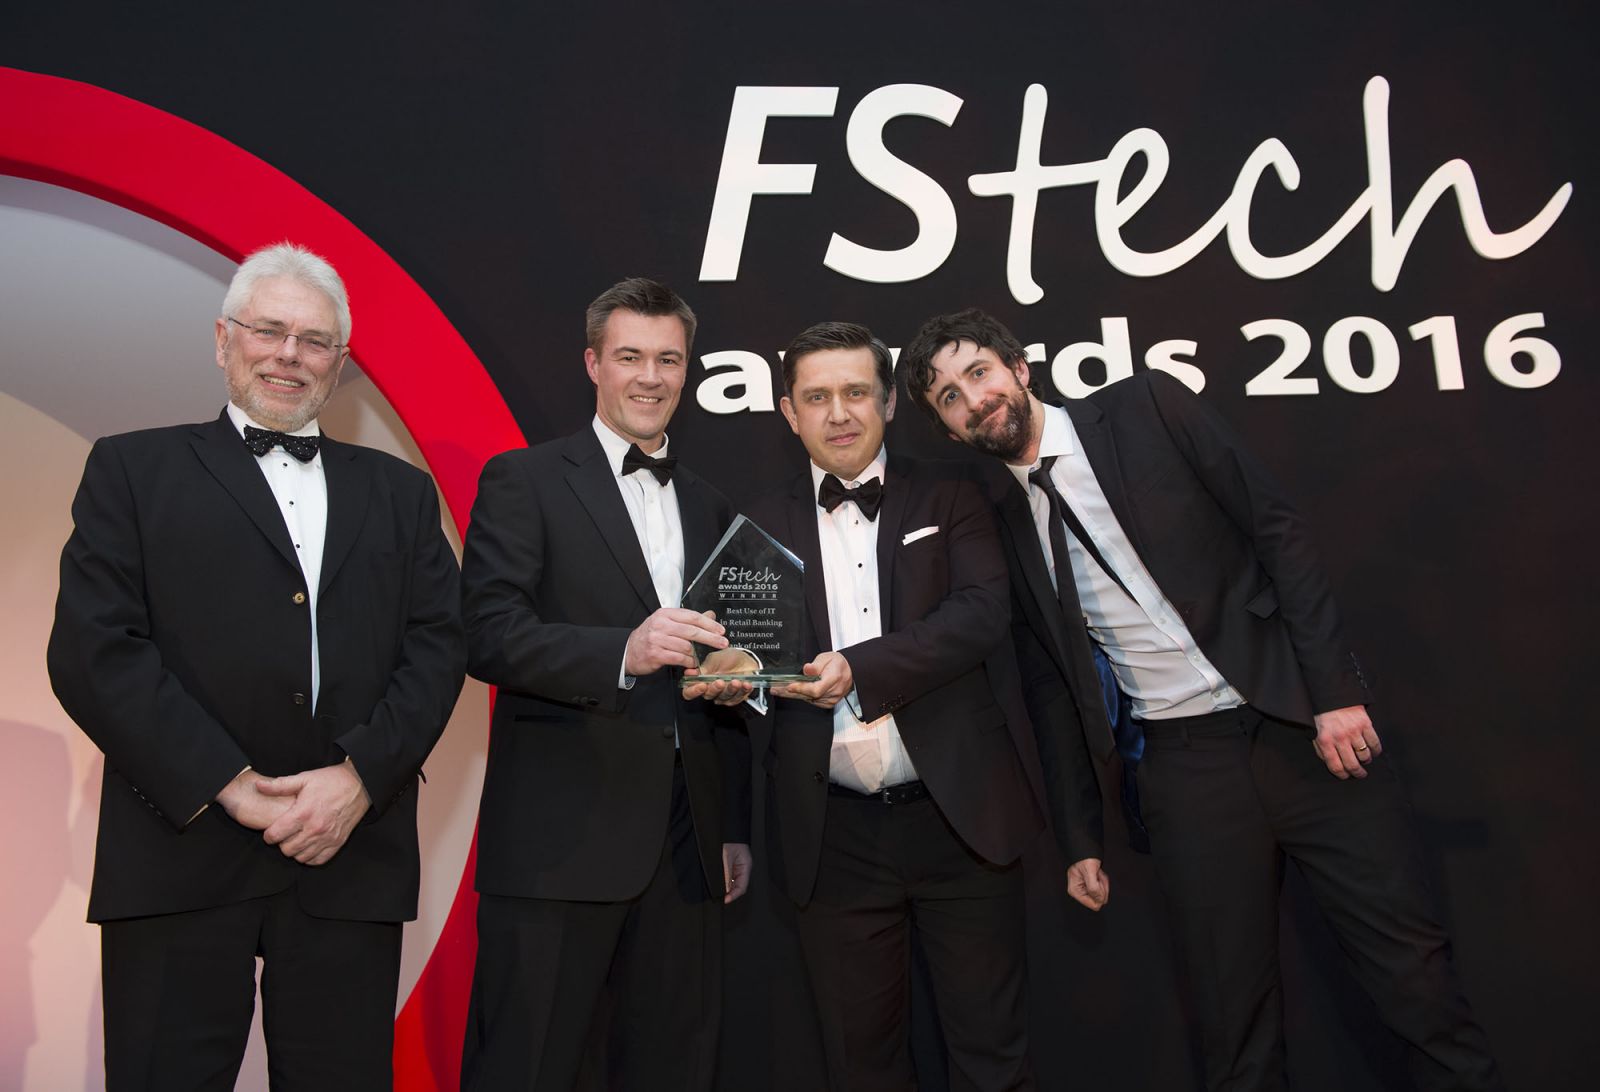 Bank of Ireland UK’s mortgage application system takes top FS Tech award